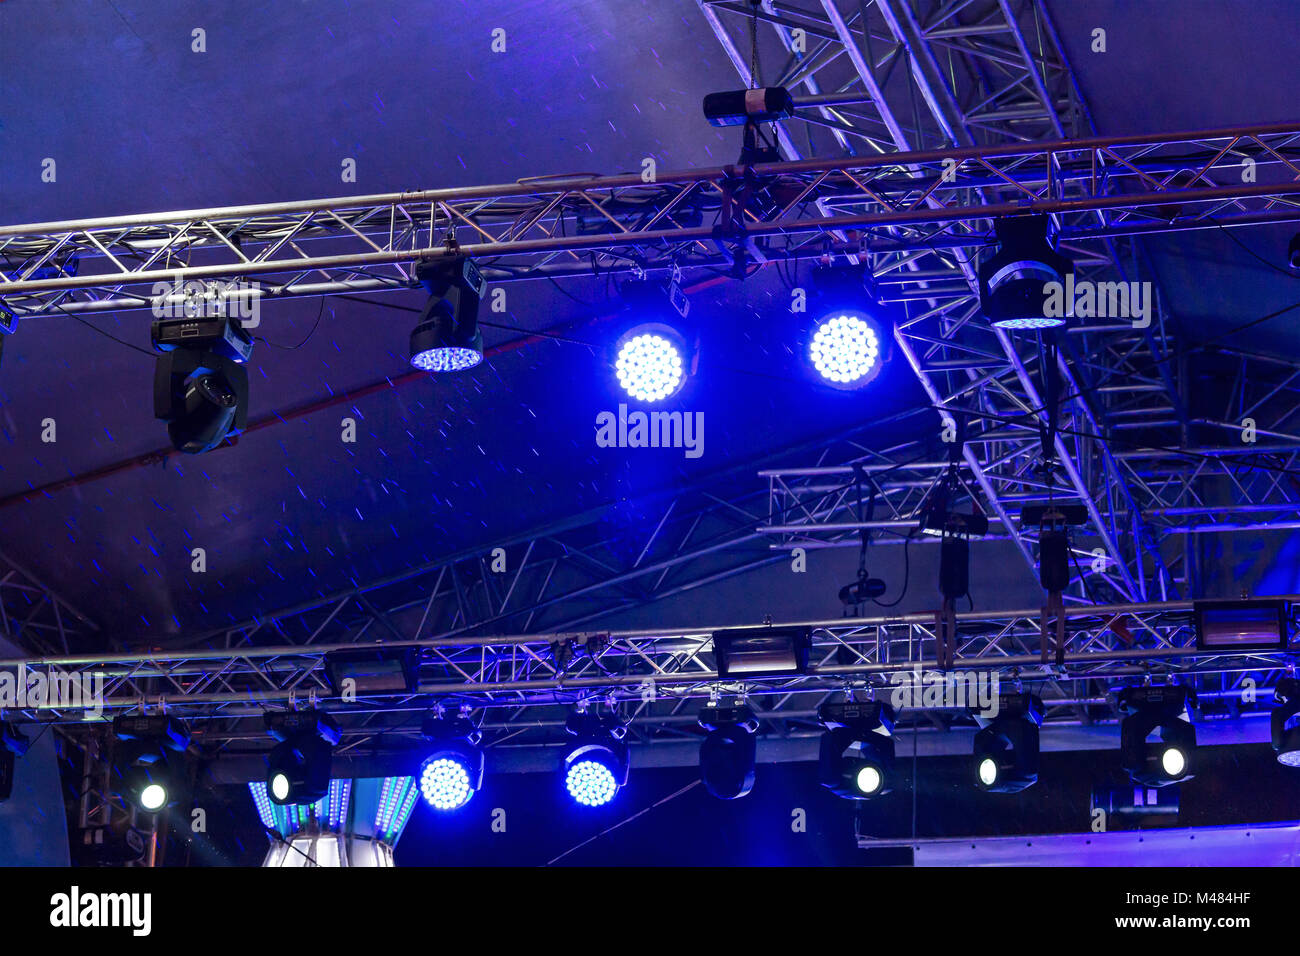 bright blue stage lights during the rain Stock Photo